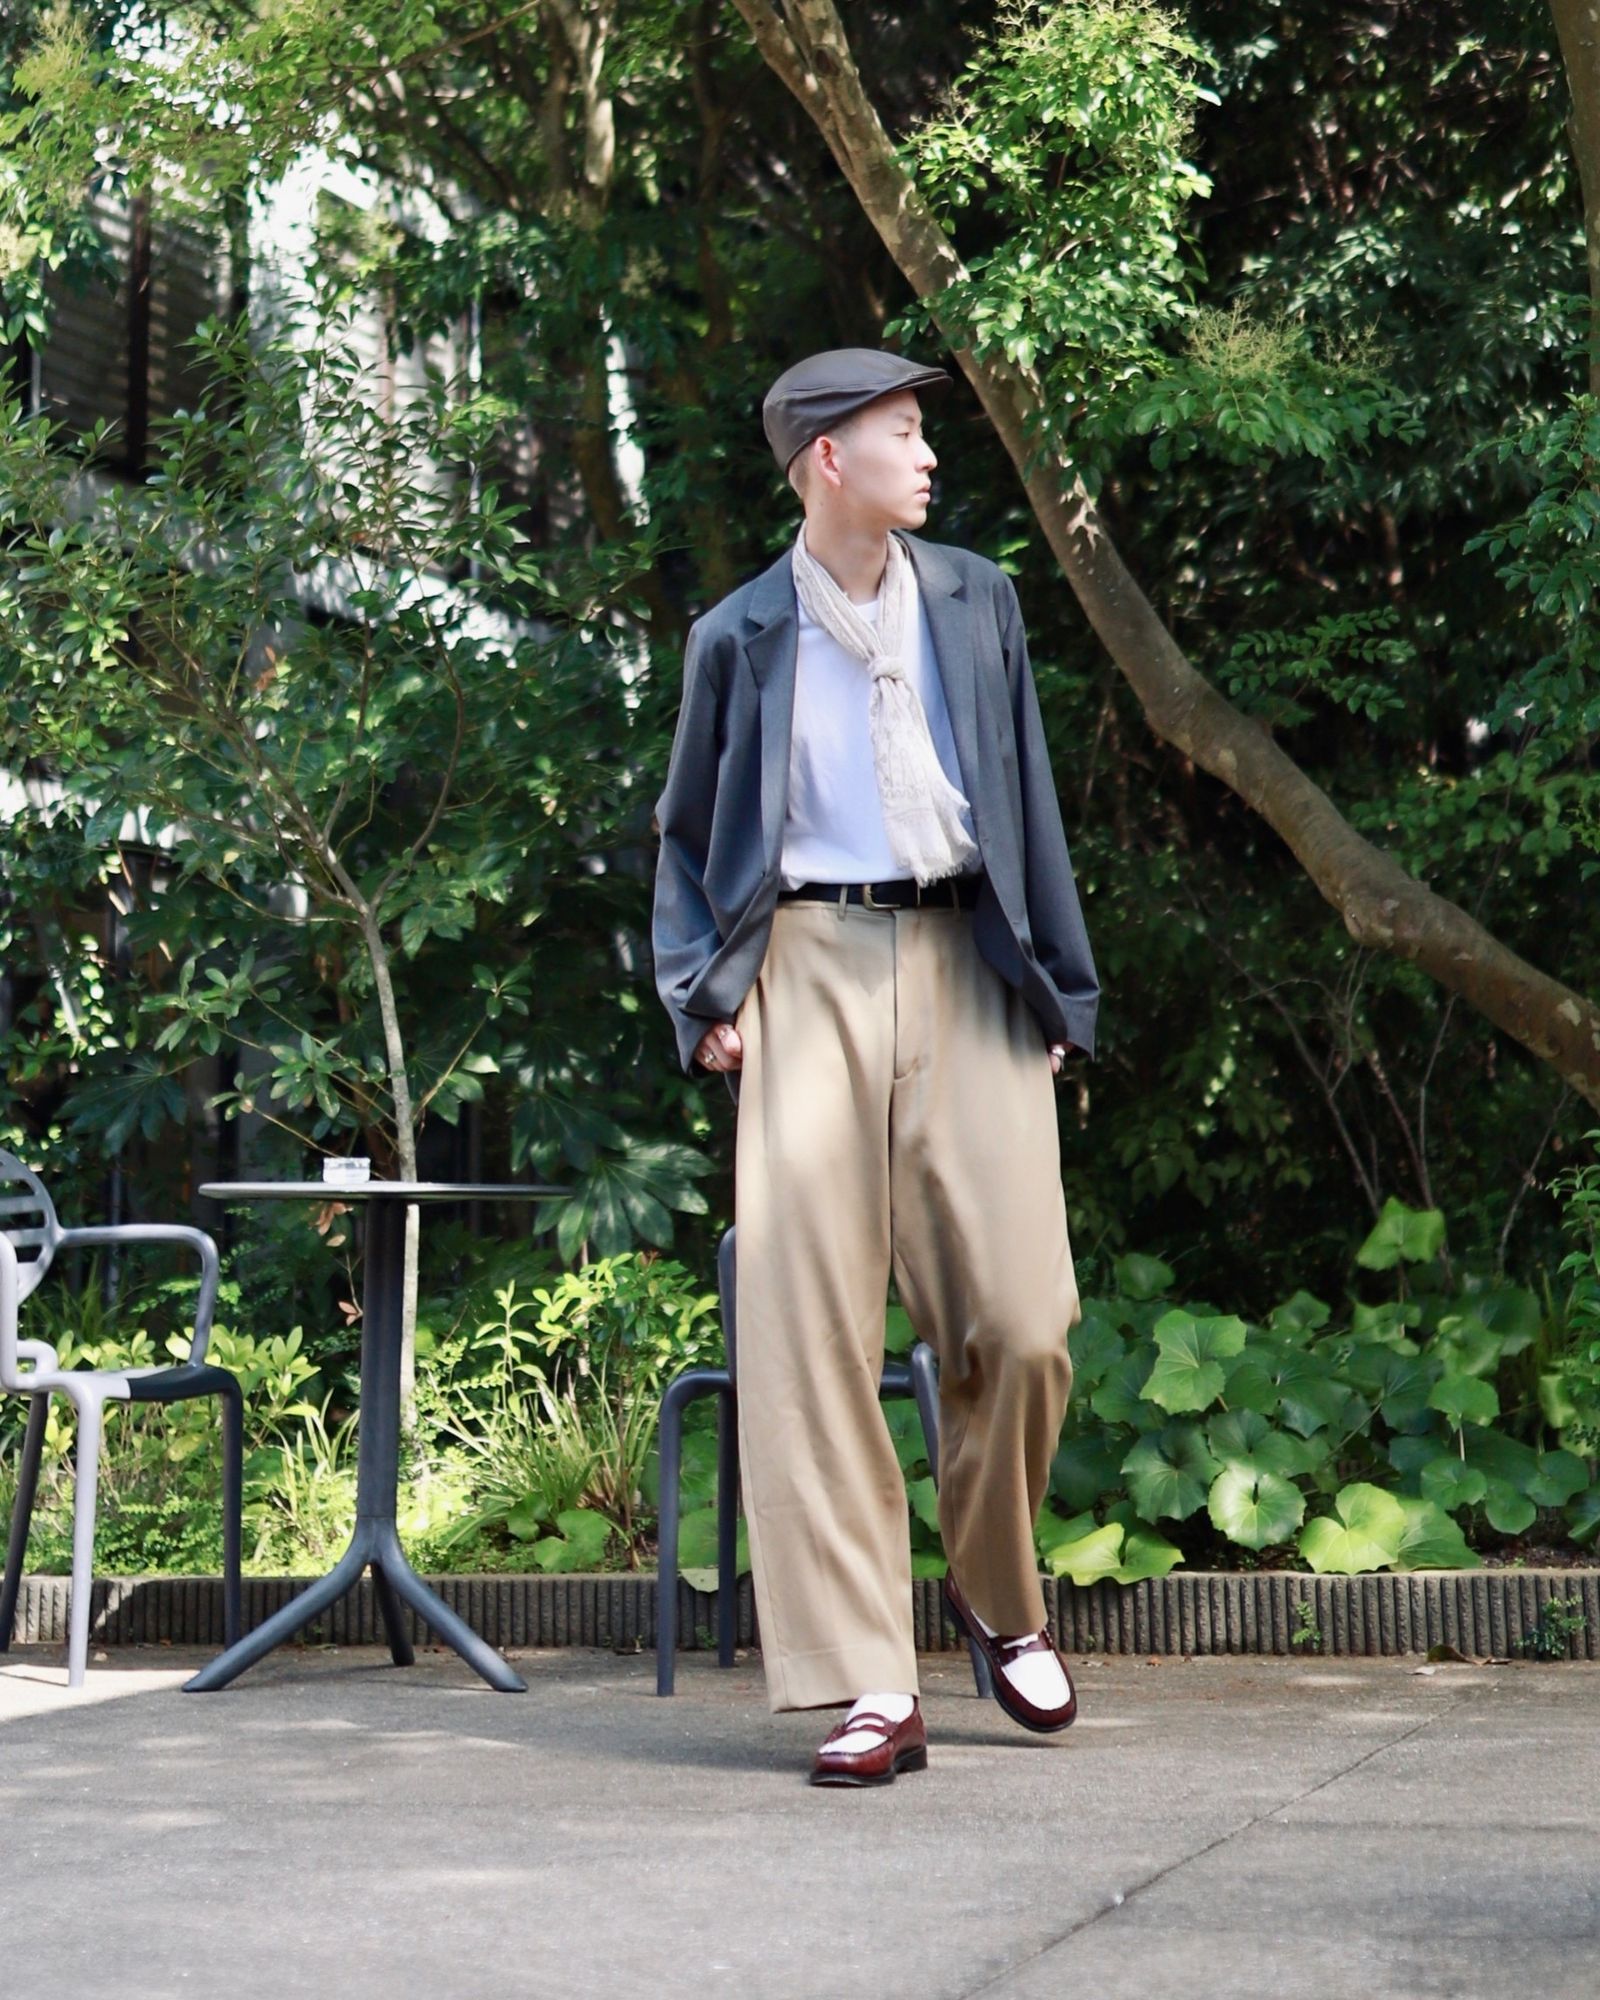 A.PRESSE アプレッセ 23AW Vintage Wool Trousersスタイル | 3506 | mark